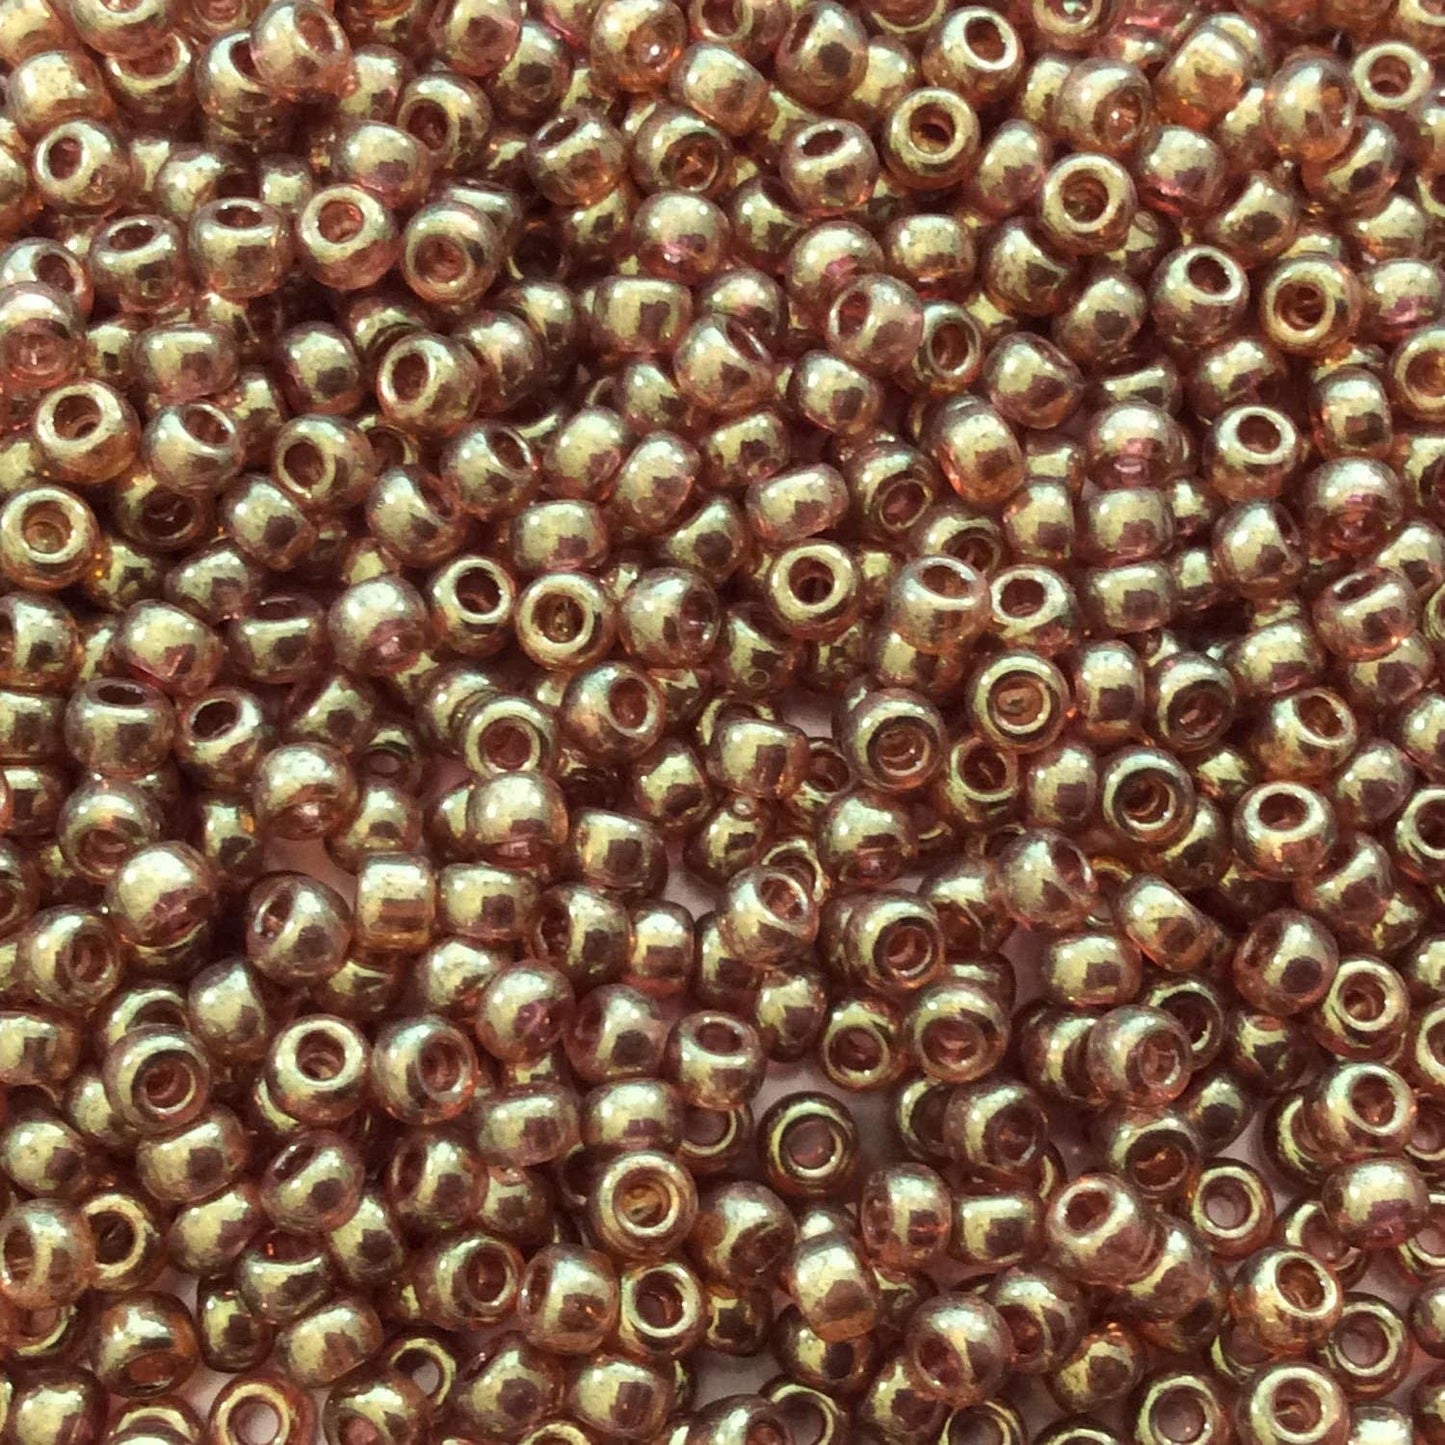 Size 8/0 Glossy Luster Finish Topaz Gold Genuine Miyuki Glass Seed Beads - Sold by 22 Gram Tubes (Approx 900 Beads per Tube) - (8-9311)